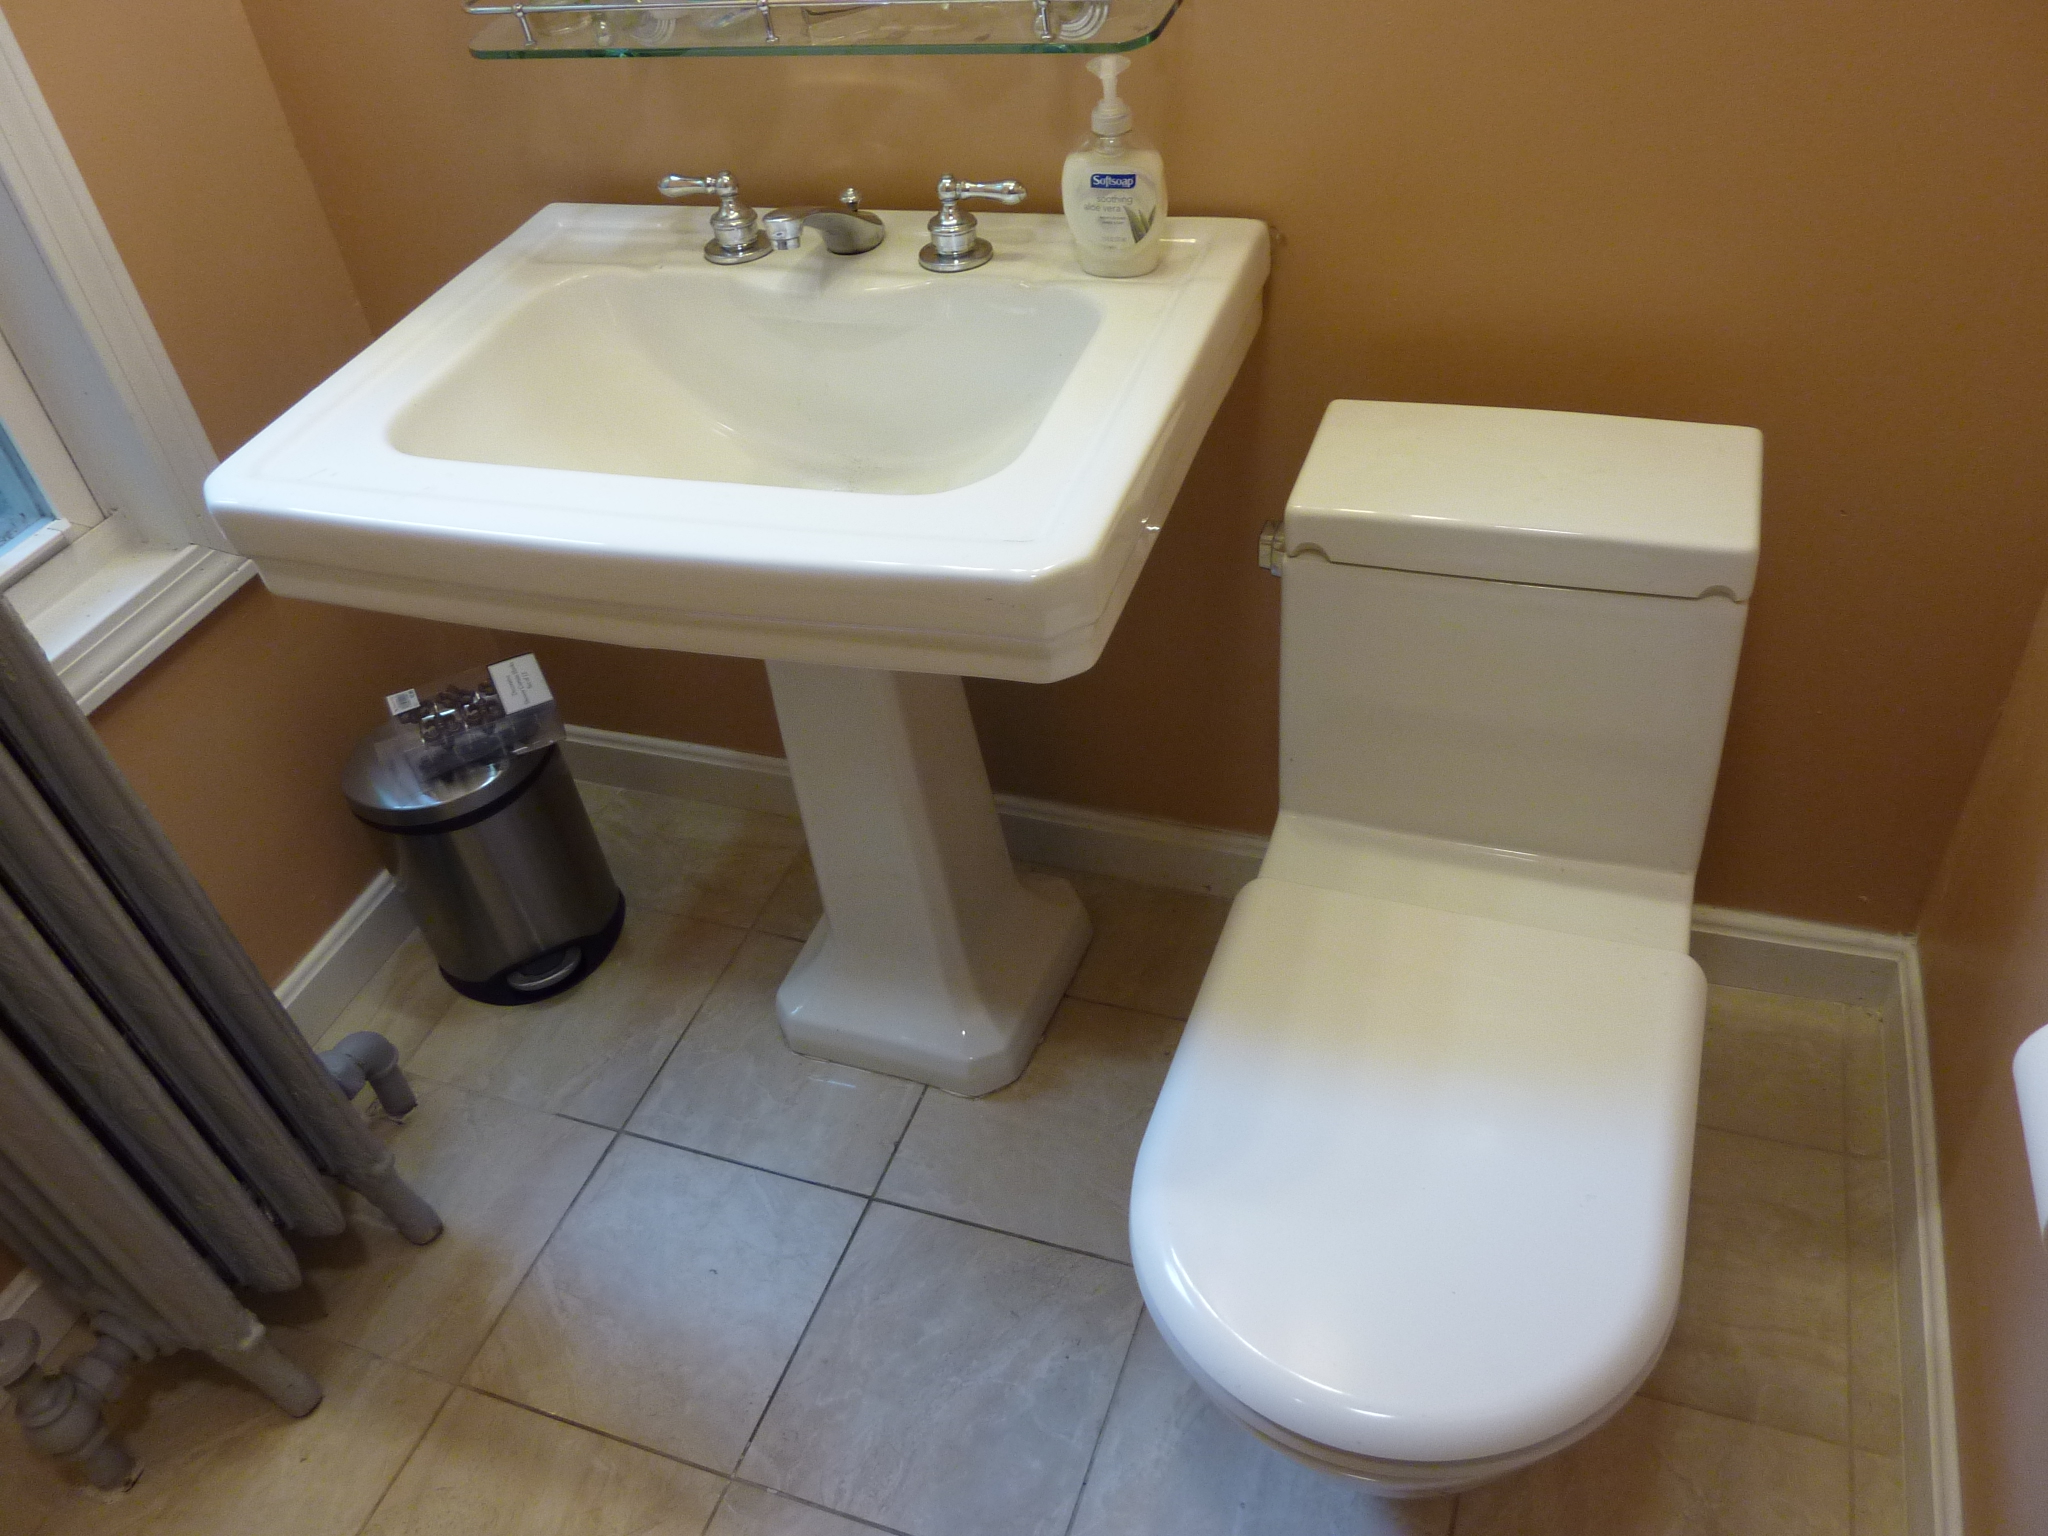 The high-quality sink and toilet were available for very affordable prices.